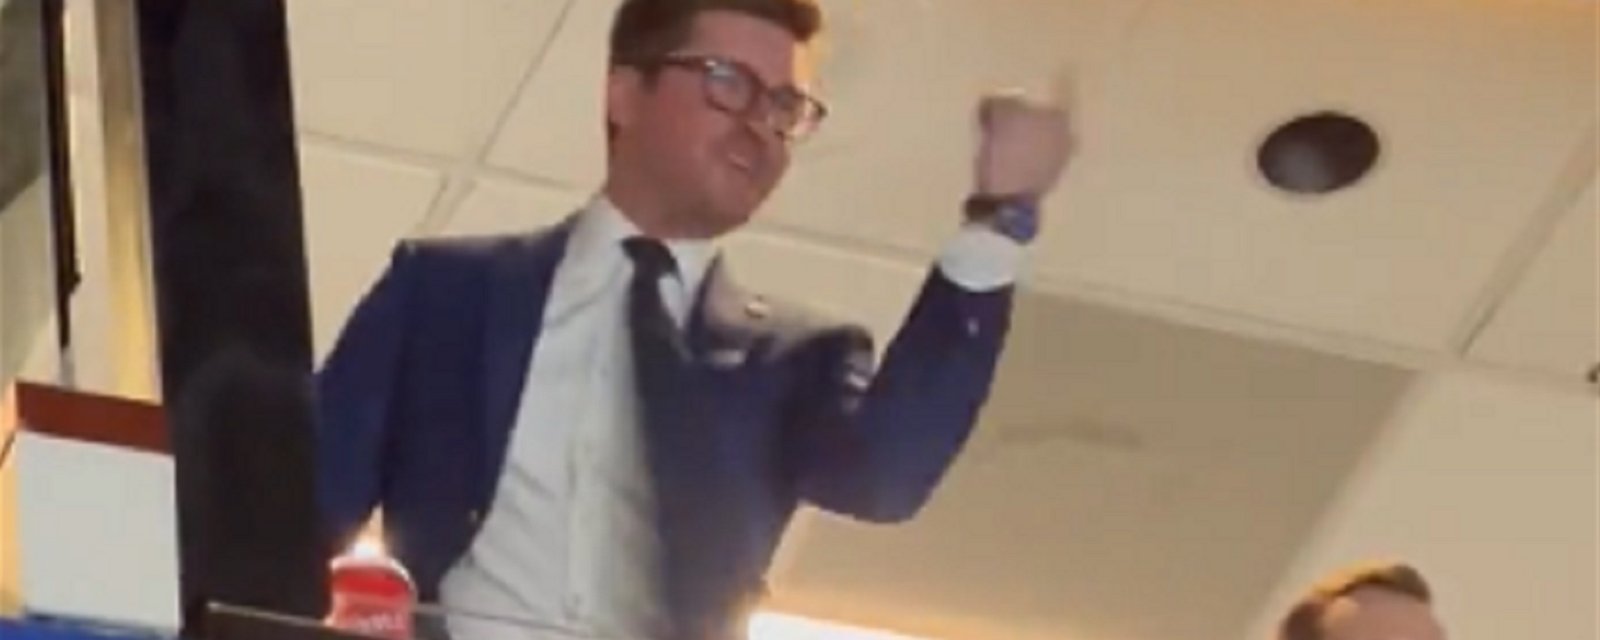 Leafs GM Kyle Dubas caught chirping at Lightning fans in Game 3.